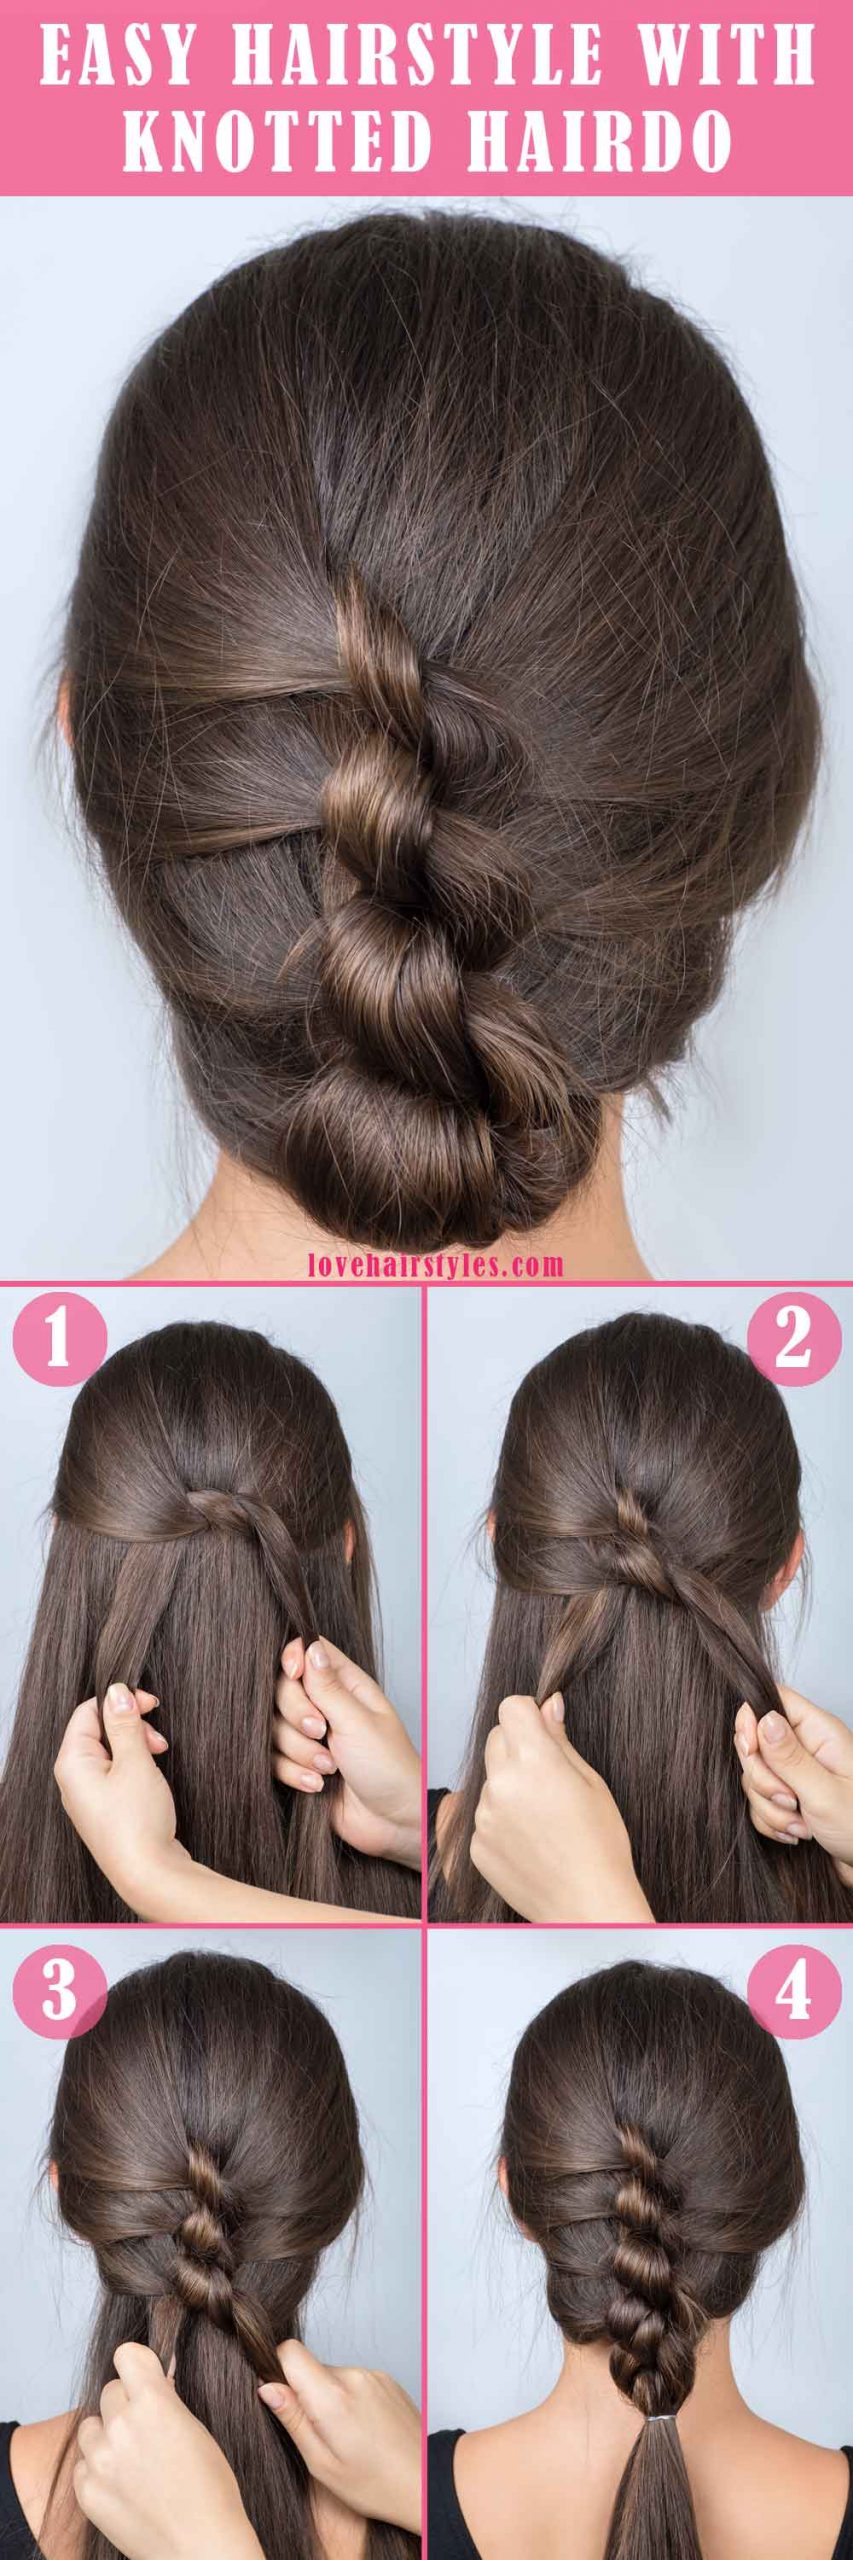 41 DIY Cool Easy Hairstyles That Real People Can Do at Home - DIY Projects  for Teens